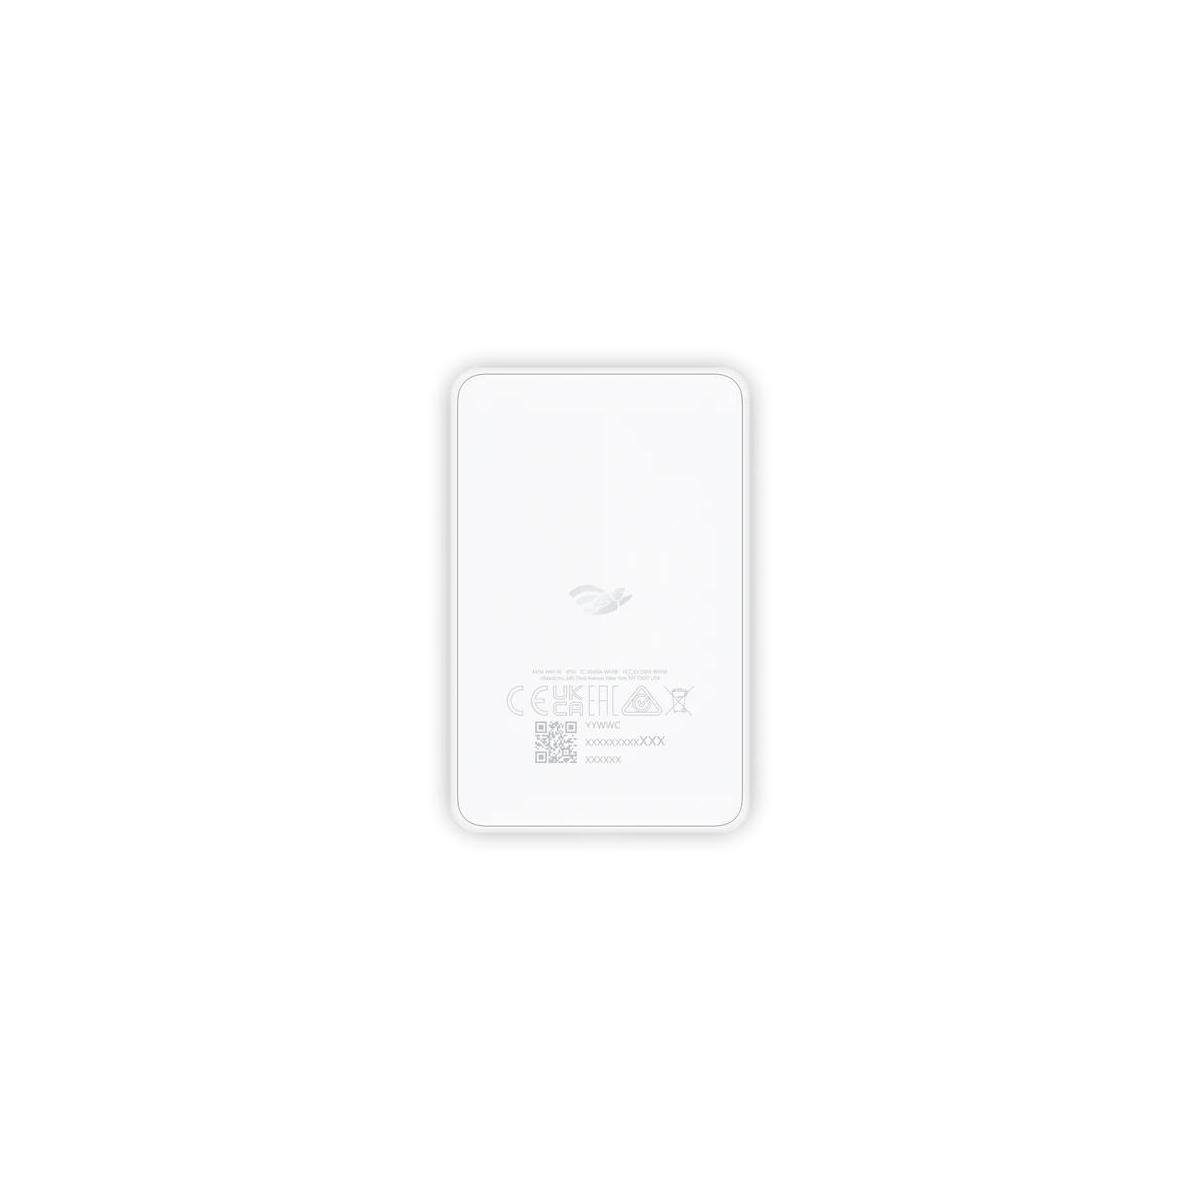 WLAN-Antenne WiFiMan-Assistent Networks Ubiquiti